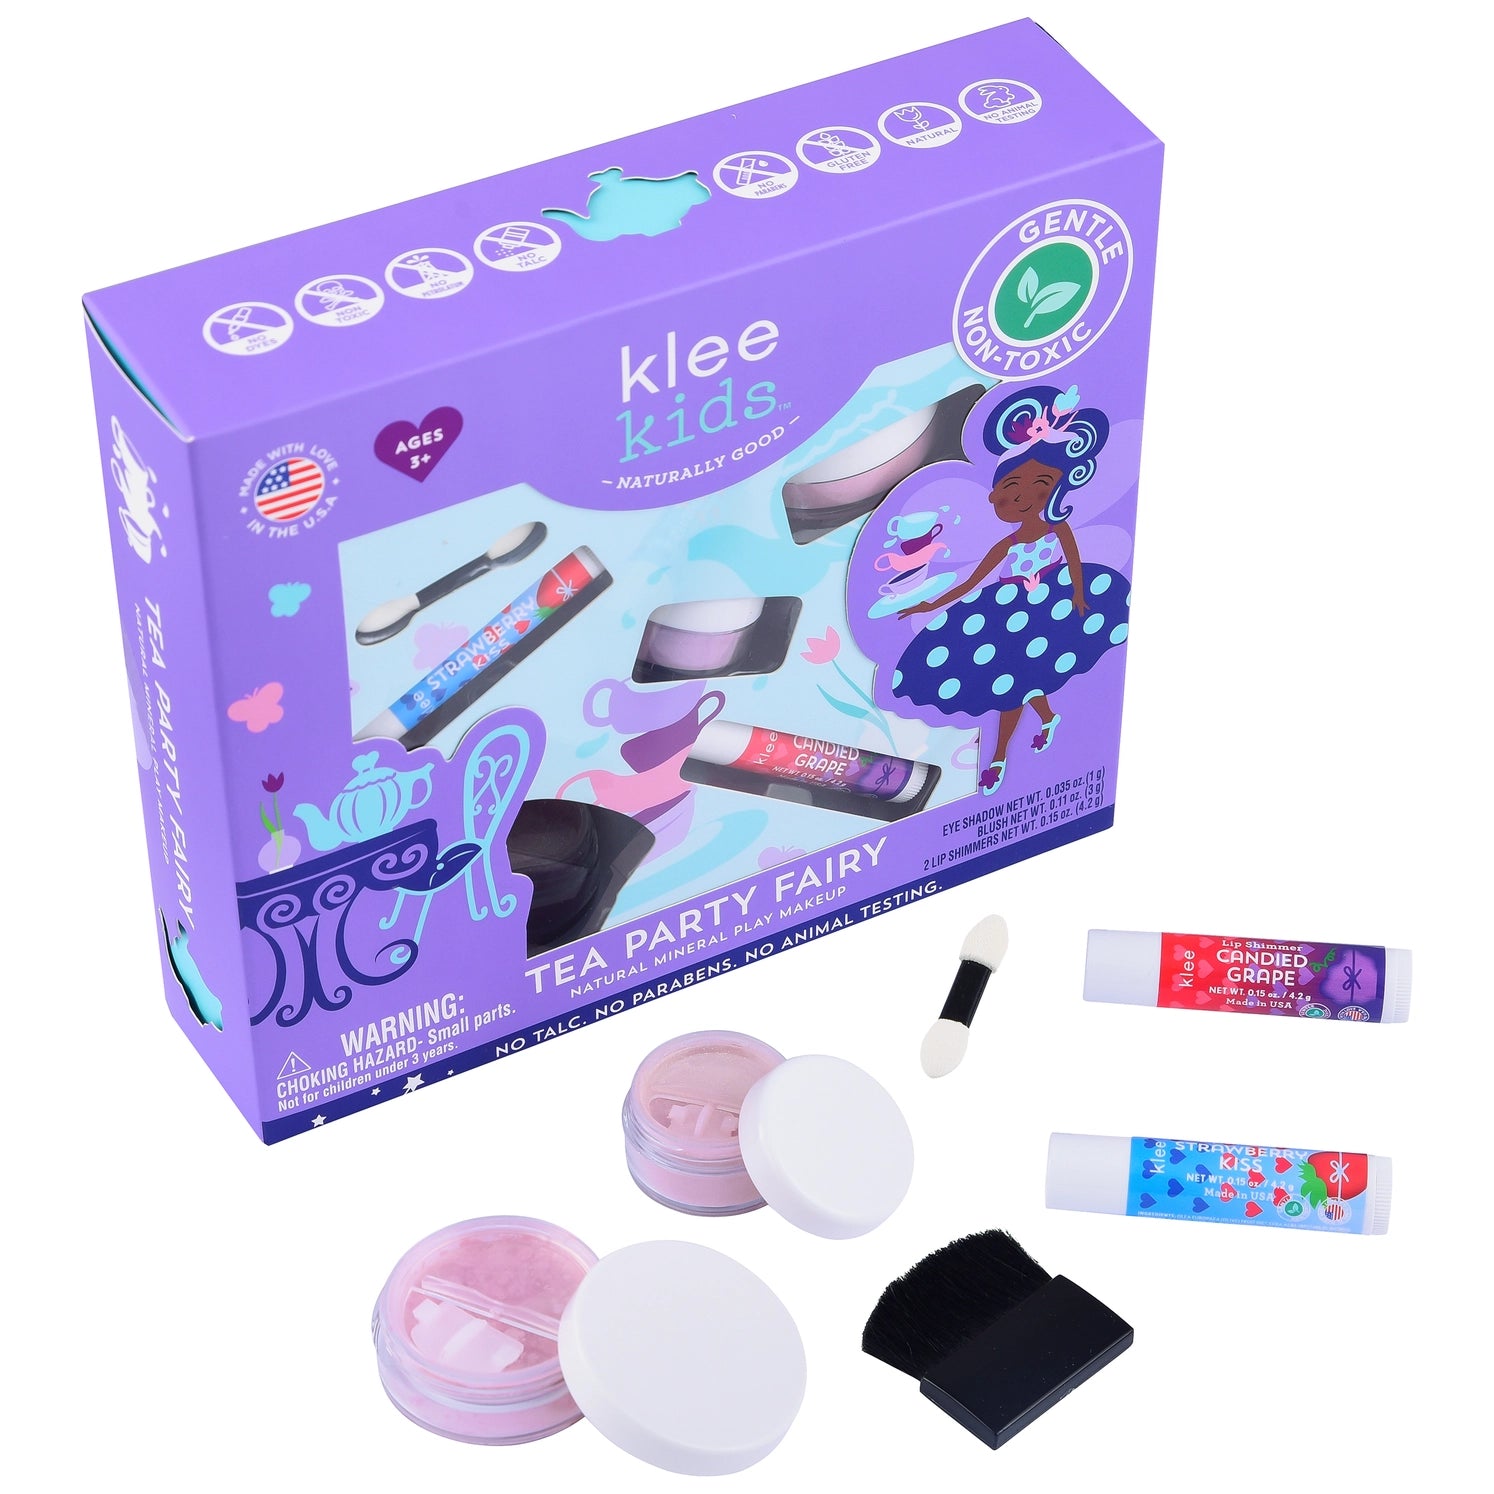 Tea Party Fairy - Klee Kids Natural Mineral Play Makeup Kit - Twinkle Twinkle Little One